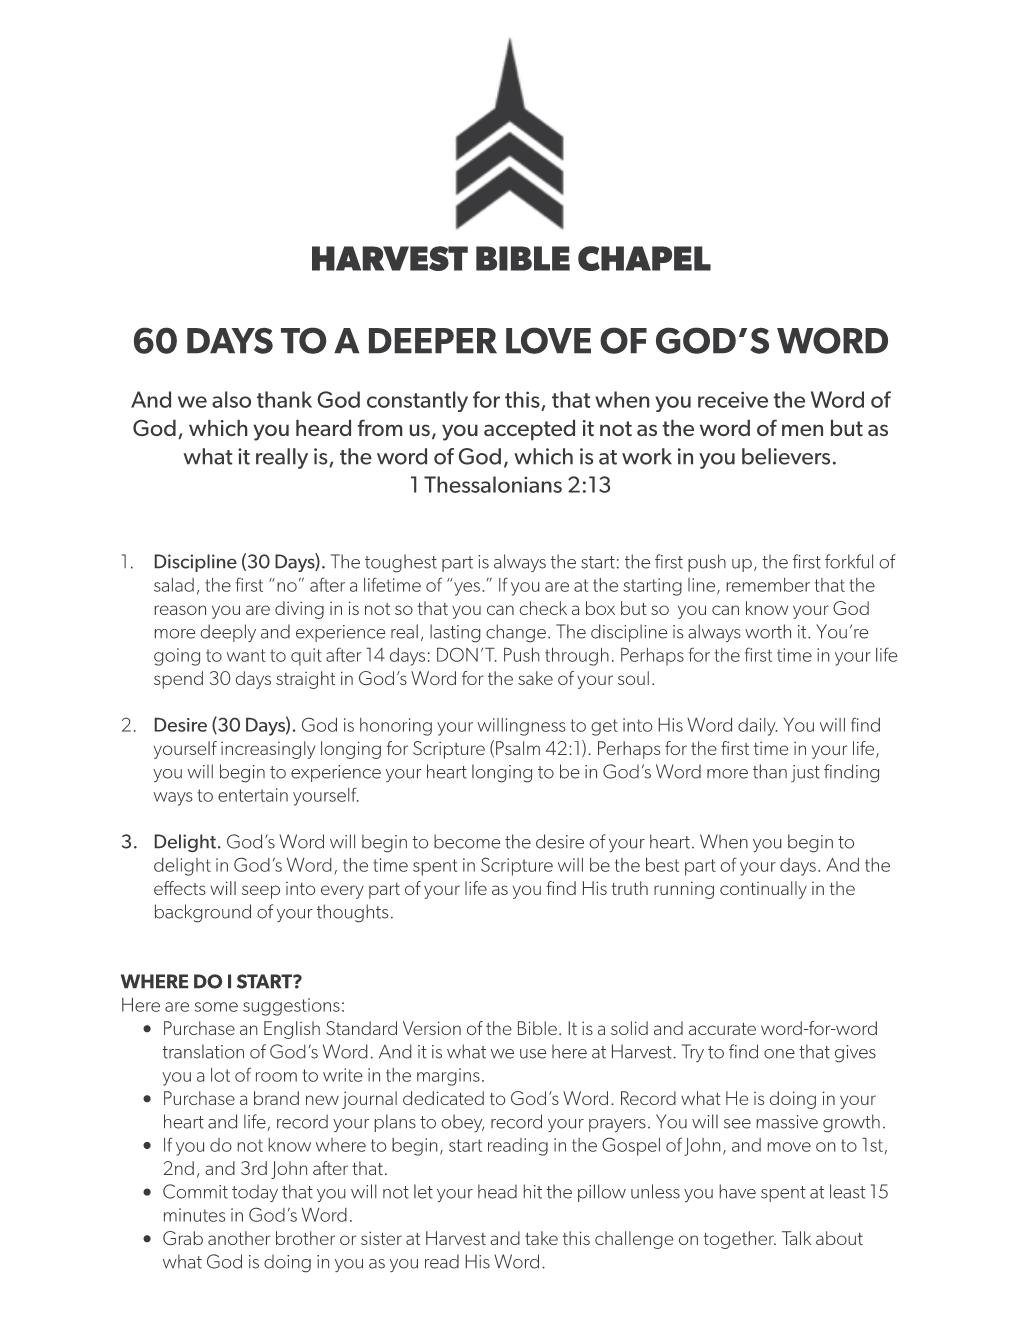 60 Days to a Deeper Love of God's Word